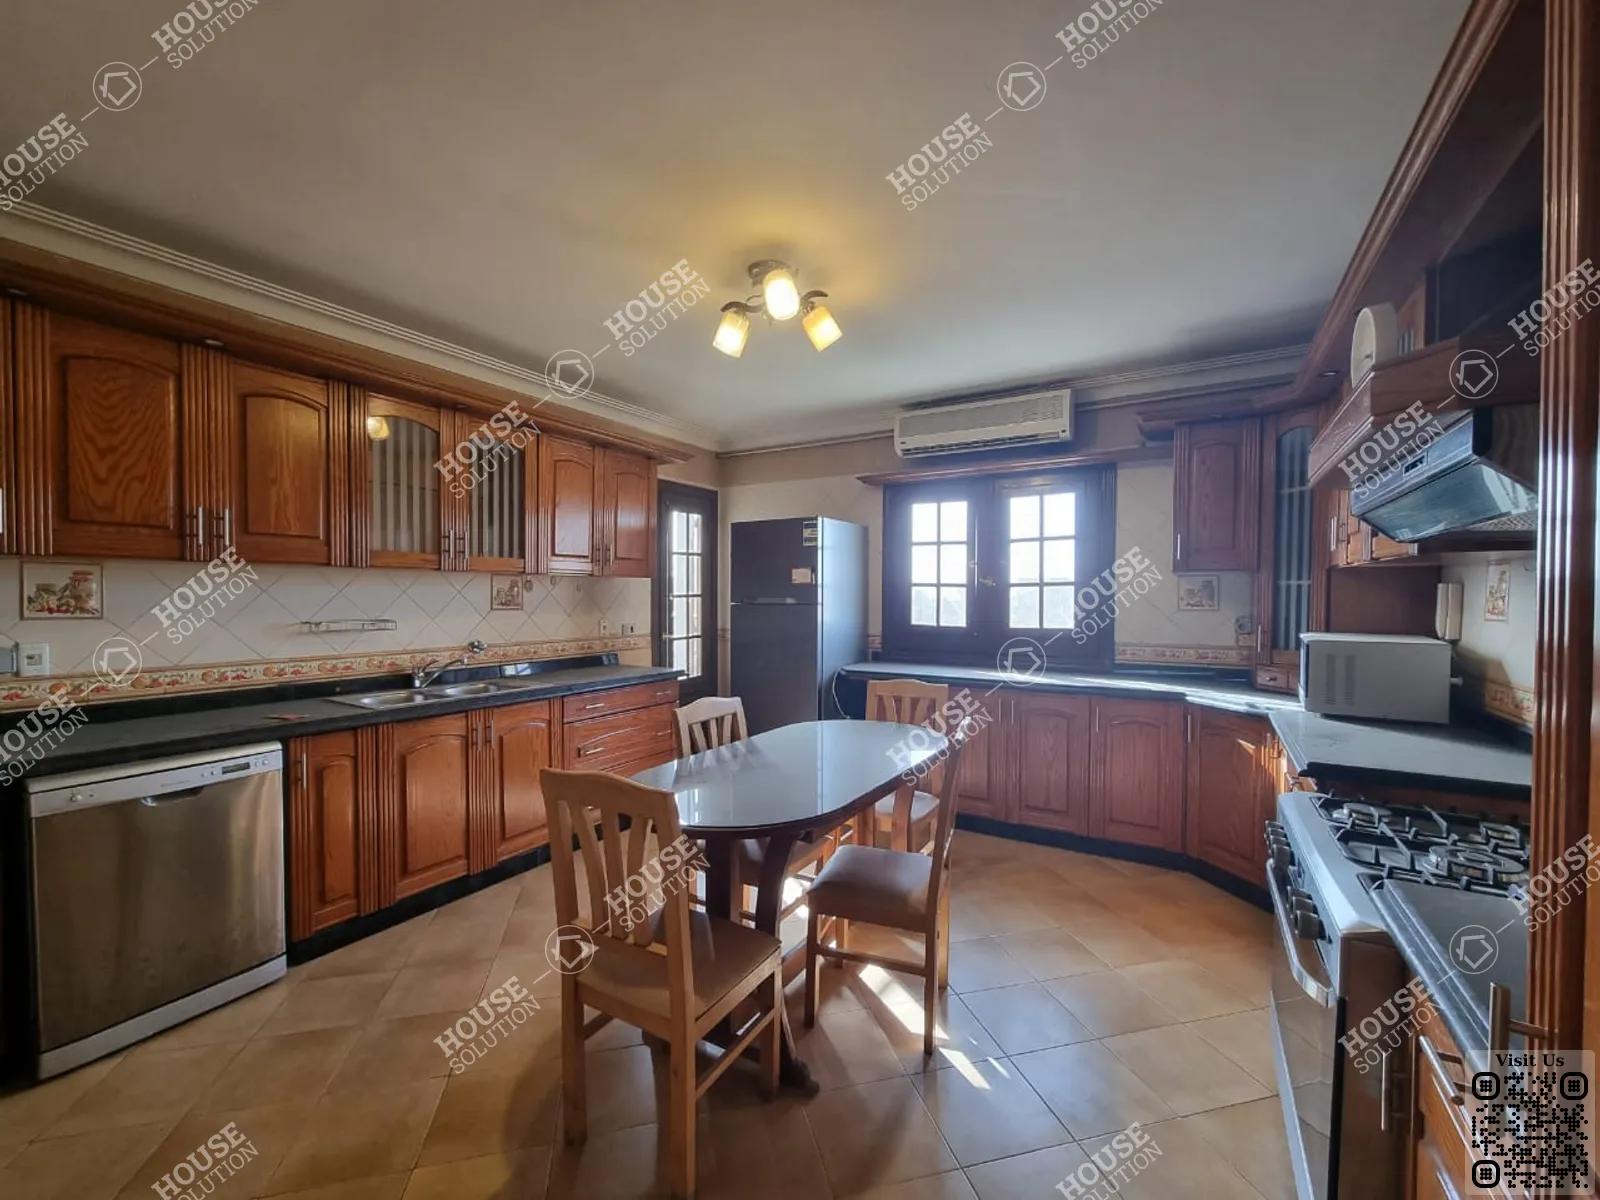 KITCHEN  @ Apartments For Rent In Maadi Maadi Sarayat Area: 377 m² consists of 4 Bedrooms 4 Bathrooms Modern furnished 5 stars #5422-1